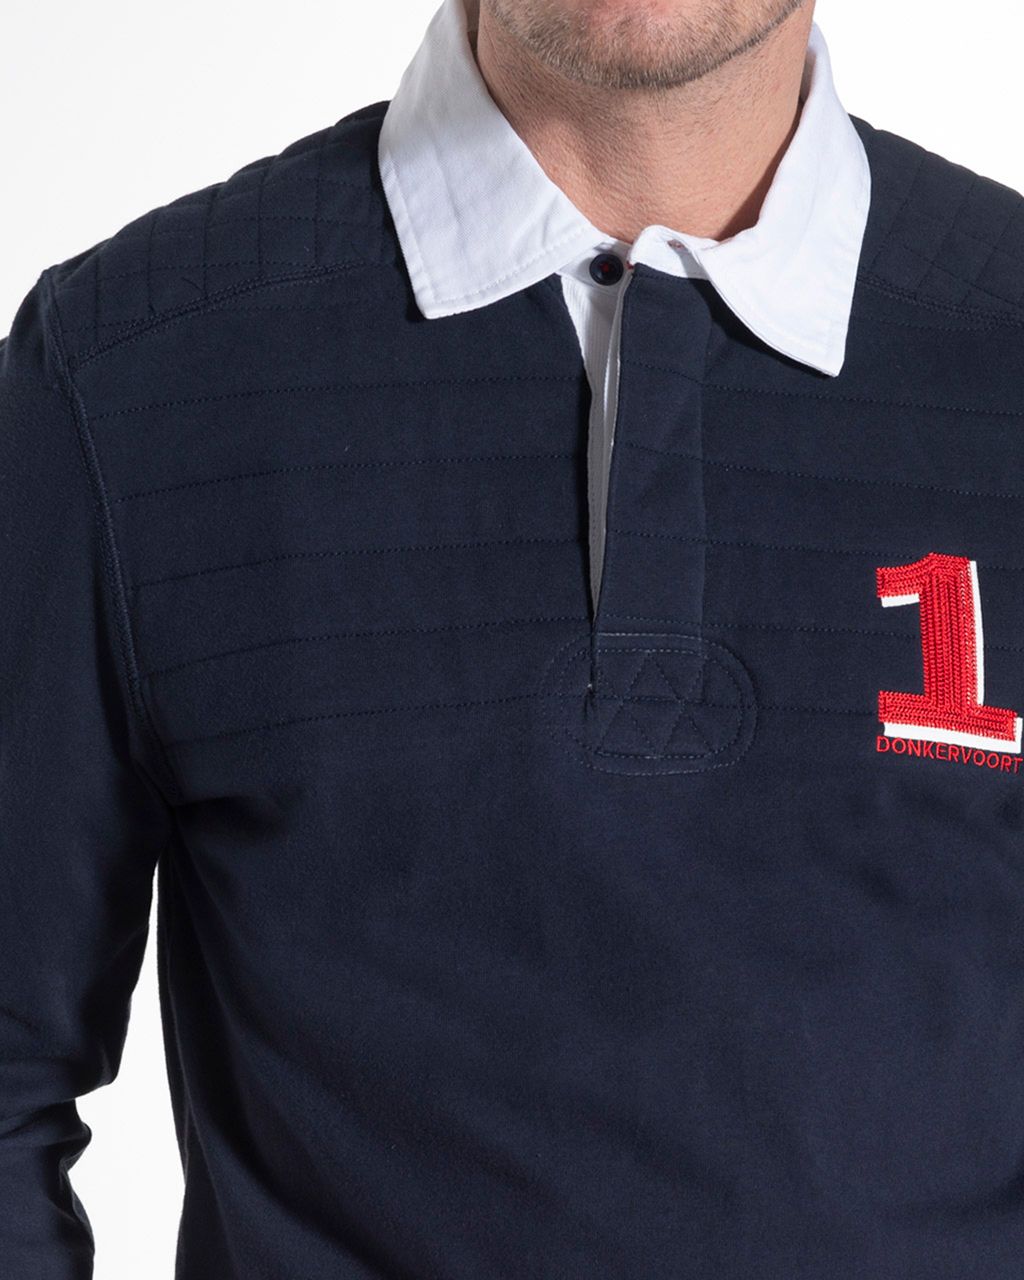 Donkervoort Polo LM  Donkerblauw uni 053745-001-L